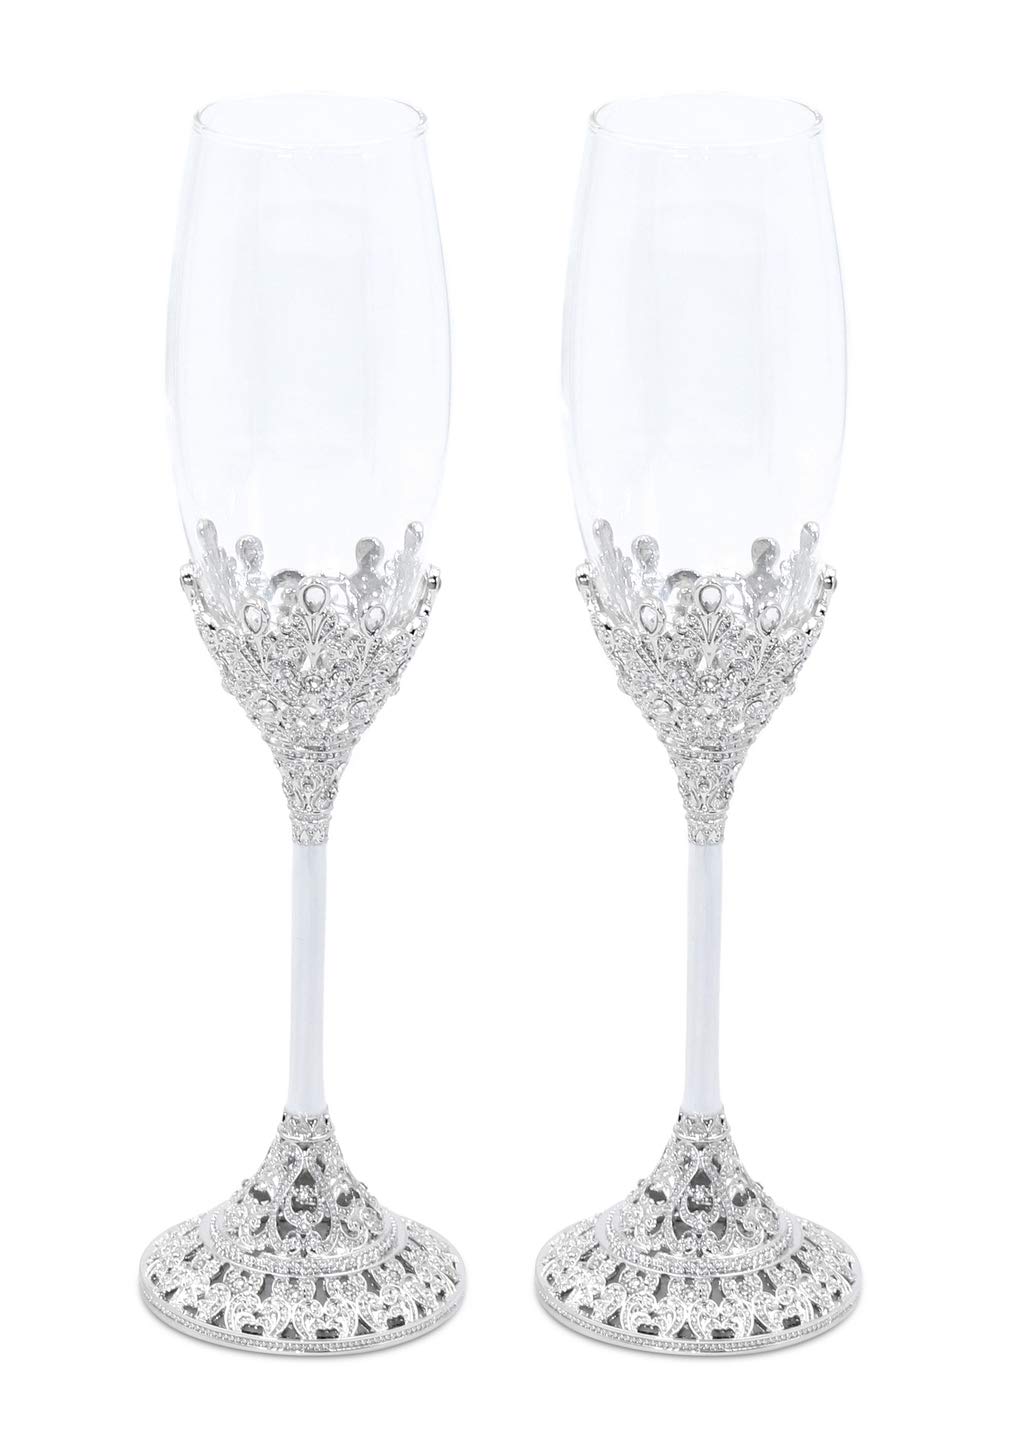 LASODY Crystal Set Champagne Flutes - Wedding Glasses for Bride & Groom - Toasting Cups Gift Sets for Couples - Engagement, Wedd